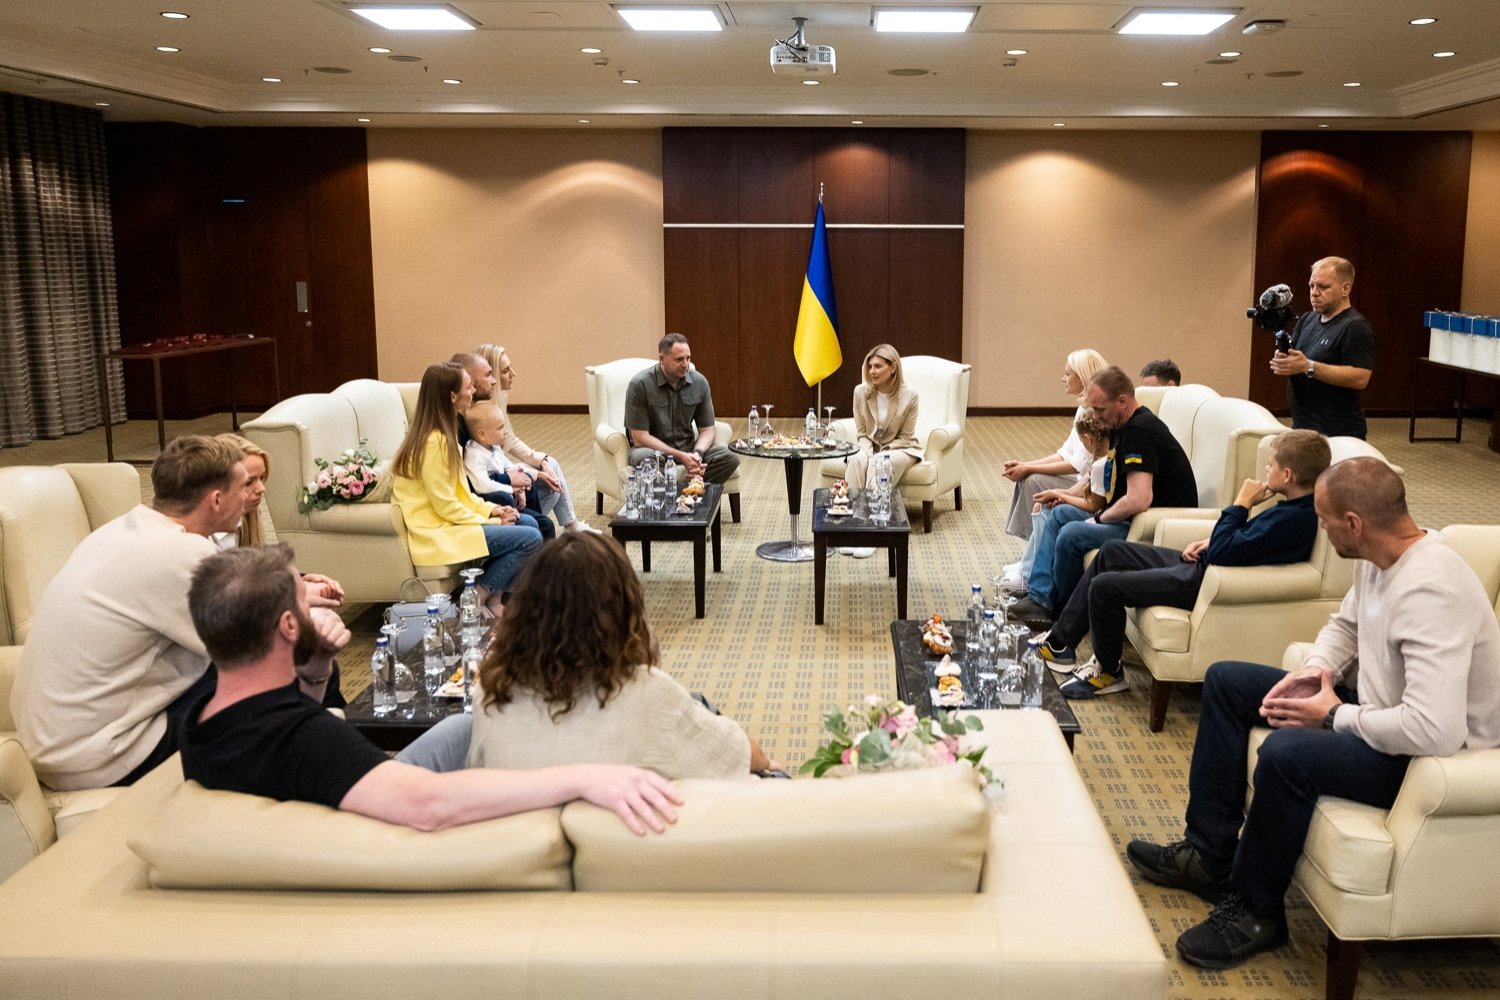 Commanders of defenders of the Azovstal Iron and Steel Works in Mariupol Denys Prokopenko, Serhii Volynskyi, Sviatoslav Palamar, Denys Shleha, Oleh Homenko and their families meet with Ukrainian first lady Olena Zelenska, amid Russia&#039;s attack on Ukraine, in Istanbul, Türkiye, October 3, 2022. (REUTERS)